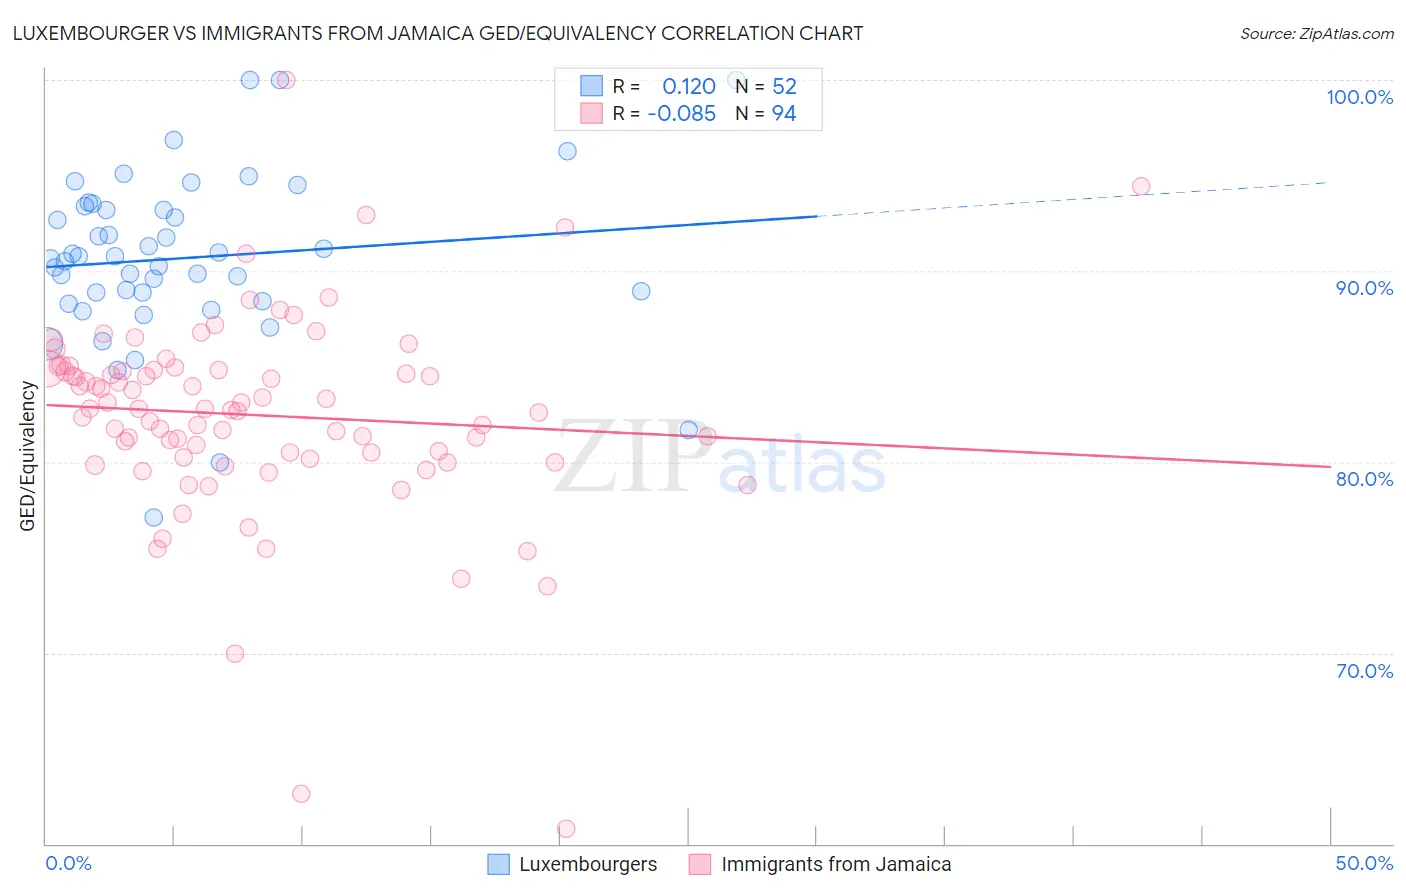 Luxembourger vs Immigrants from Jamaica GED/Equivalency